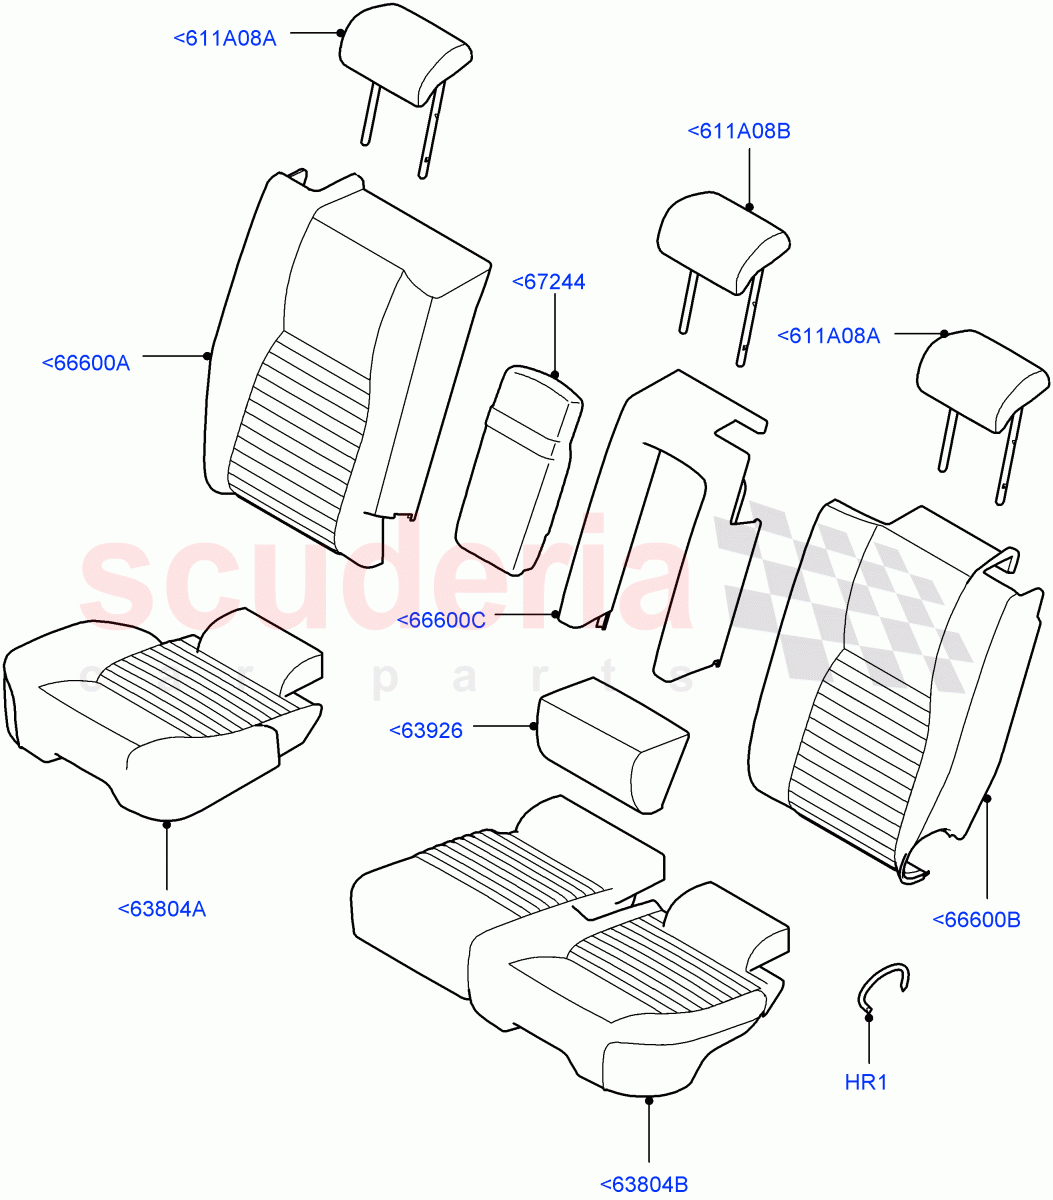 Rear Seat Covers(Taurus Leather Perforated,Changsu (China),60/40 Load Through With Slide,With 60/40 Manual Fold Thru Rr Seat)((V)FROMFG000001) of Land Rover Land Rover Discovery Sport (2015+) [2.0 Turbo Diesel]